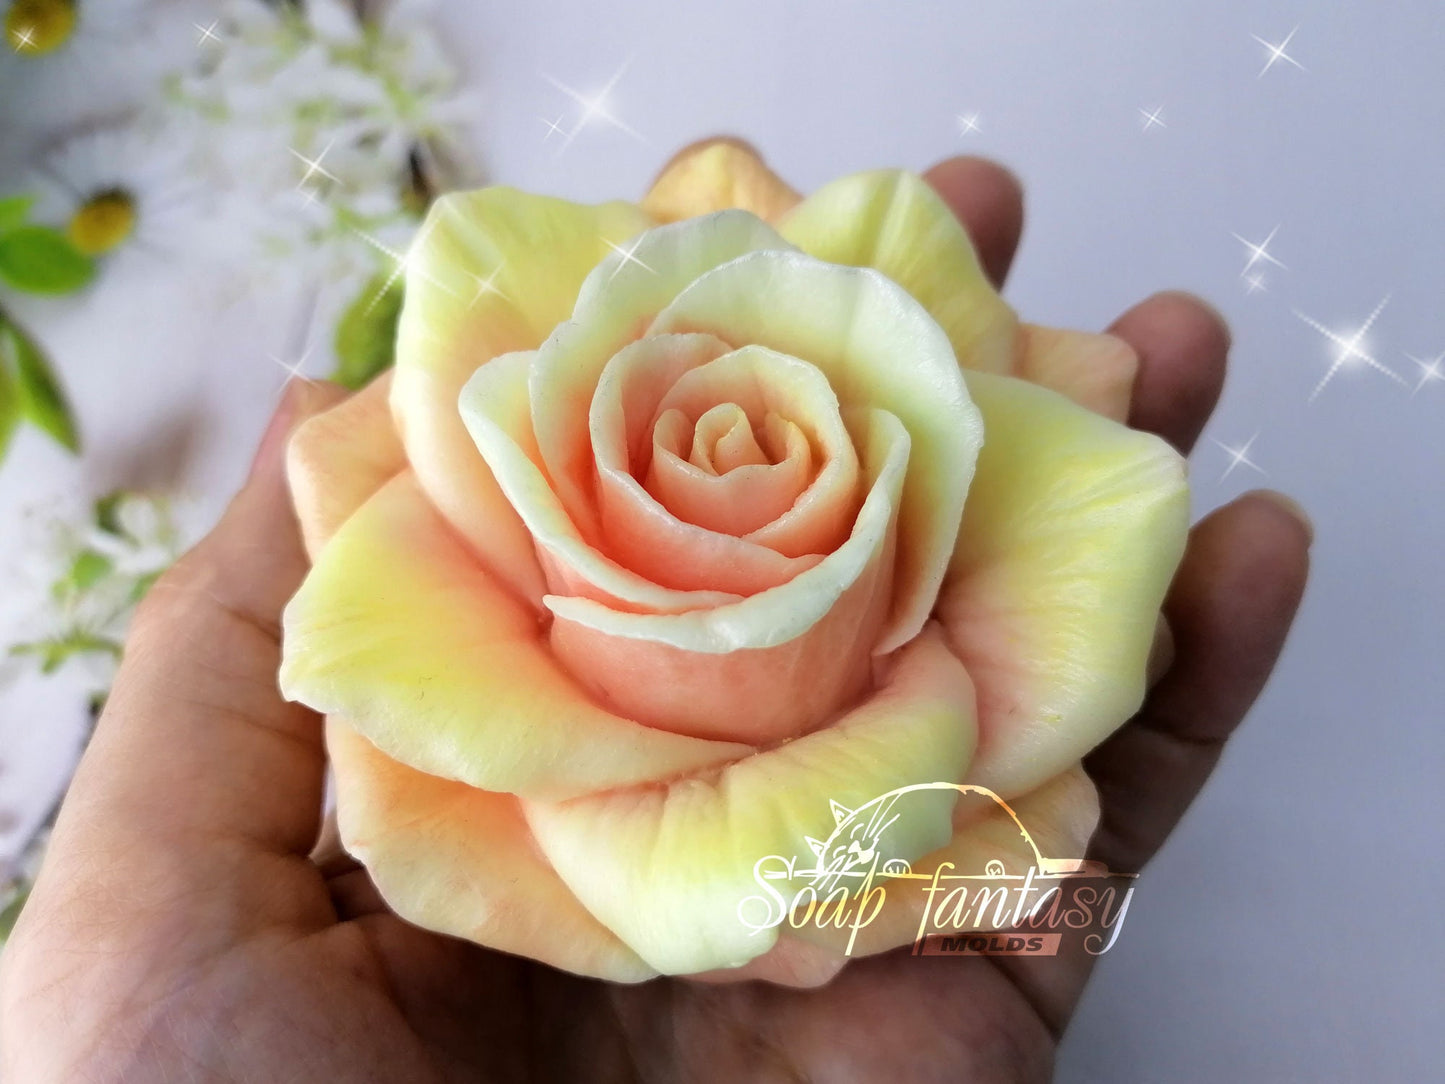 Big rose "Orange Queen" silicone mold for soap making